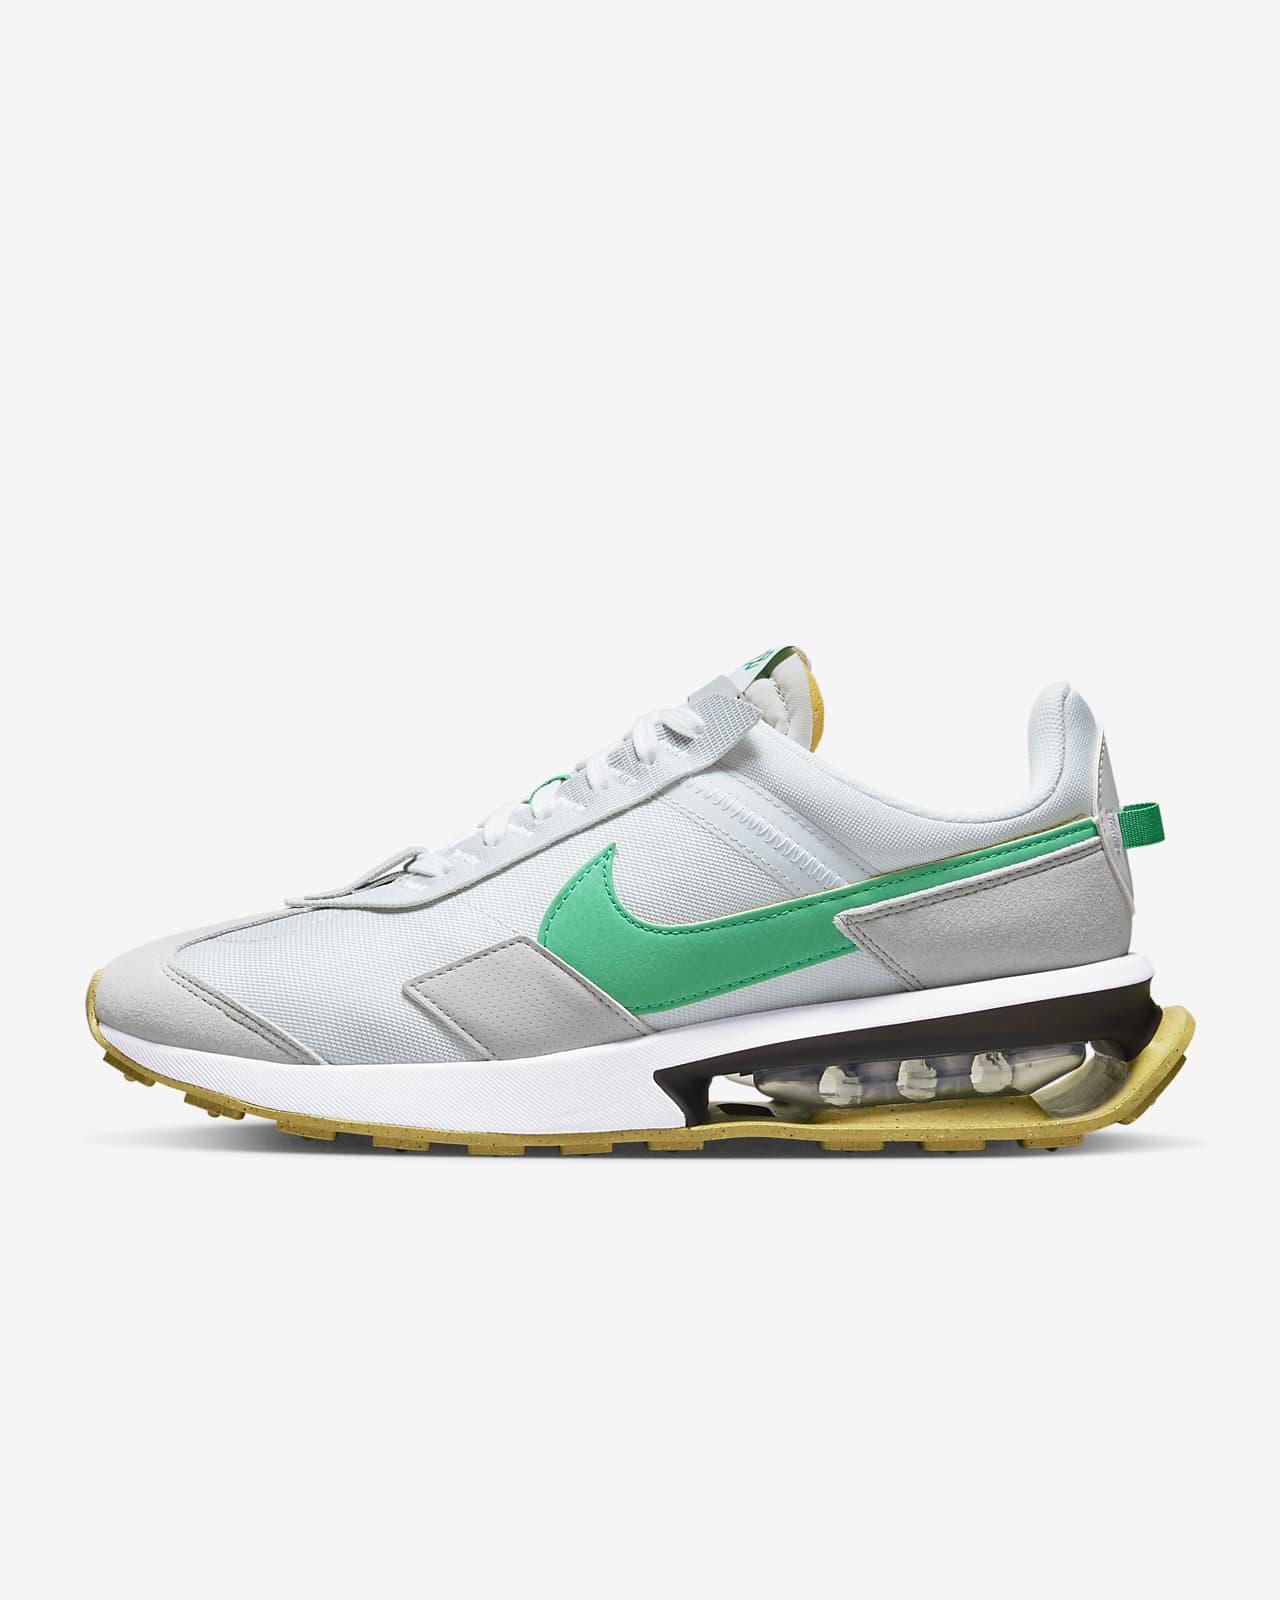 Tractor Be excited In the mercy of Calzado para hombre Nike Air Max Pre-Day. Nike.com